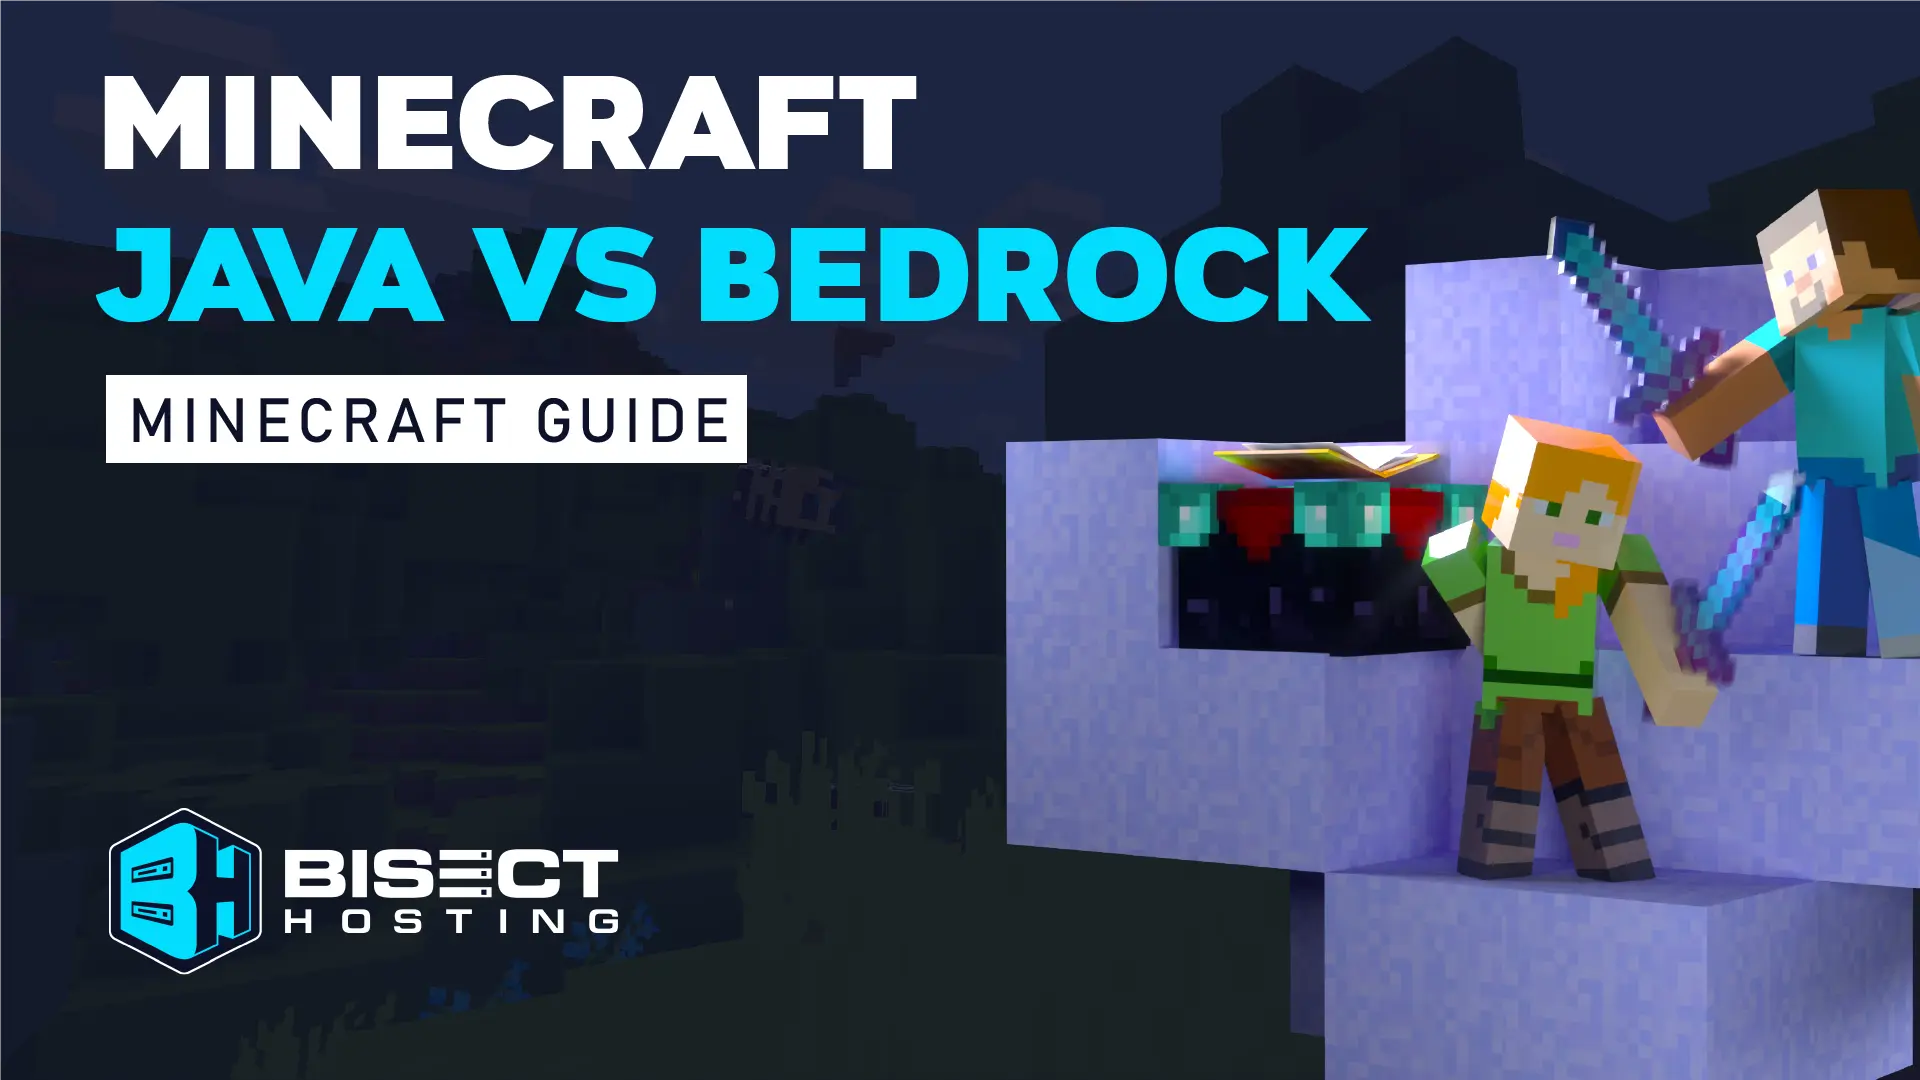 Java Edition Vs Bedrock Edition: The Lesser Known Differences